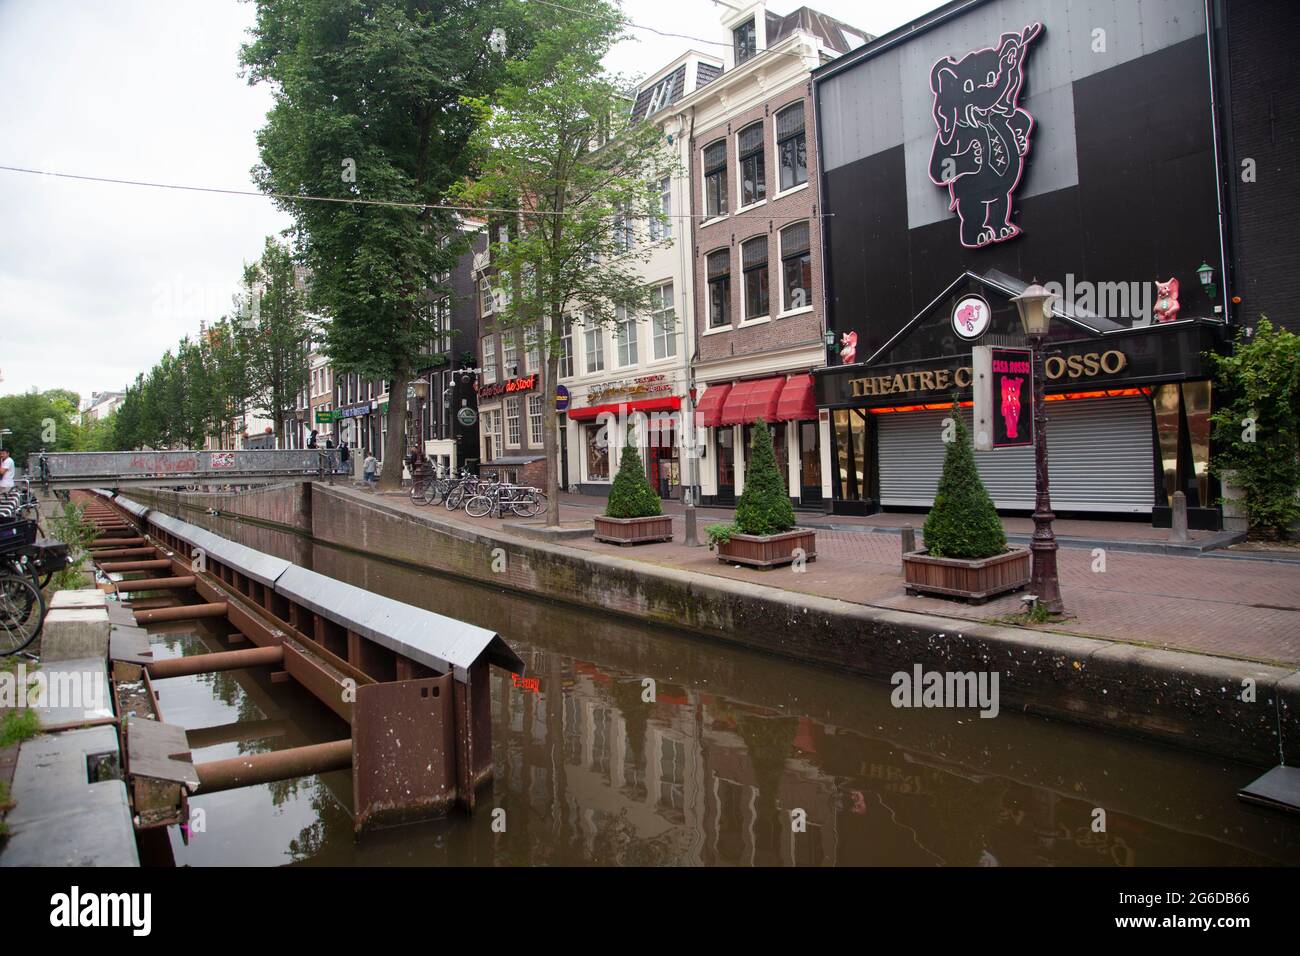 Amsterdam city with its water canals Stock Photo